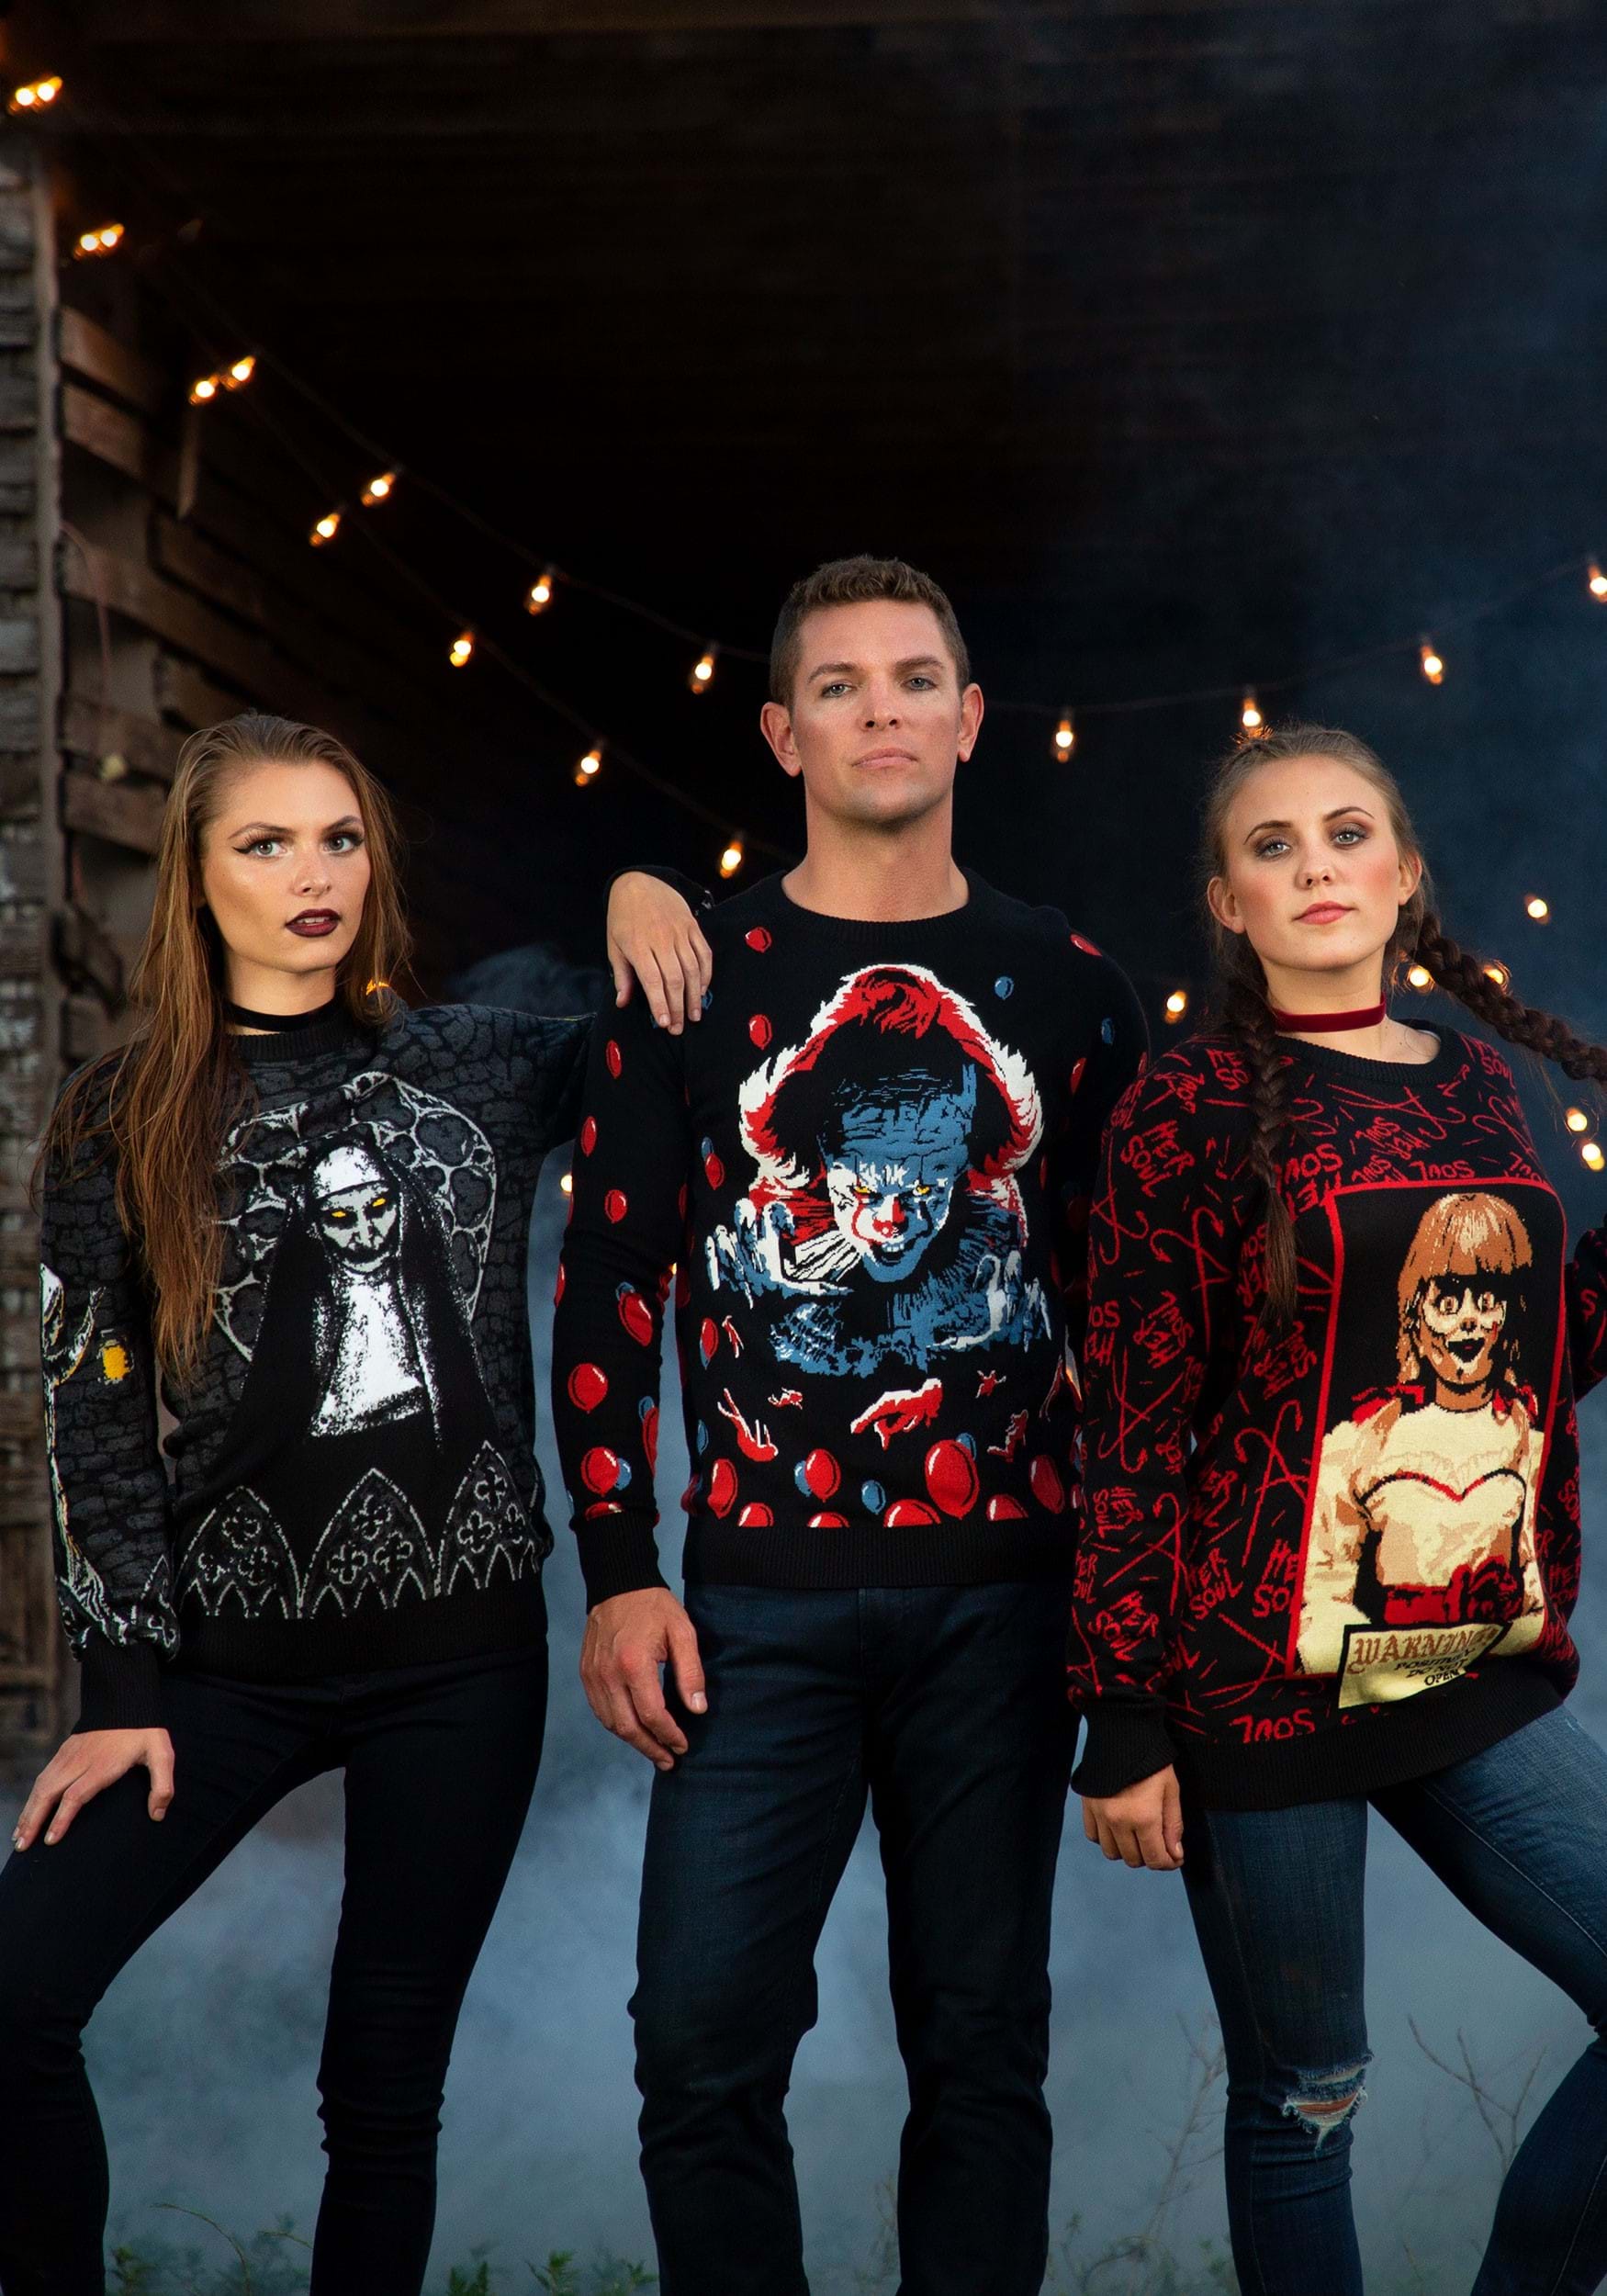 Annabelle Adult Halloween Sweater , Ugly Halloween Sweaters